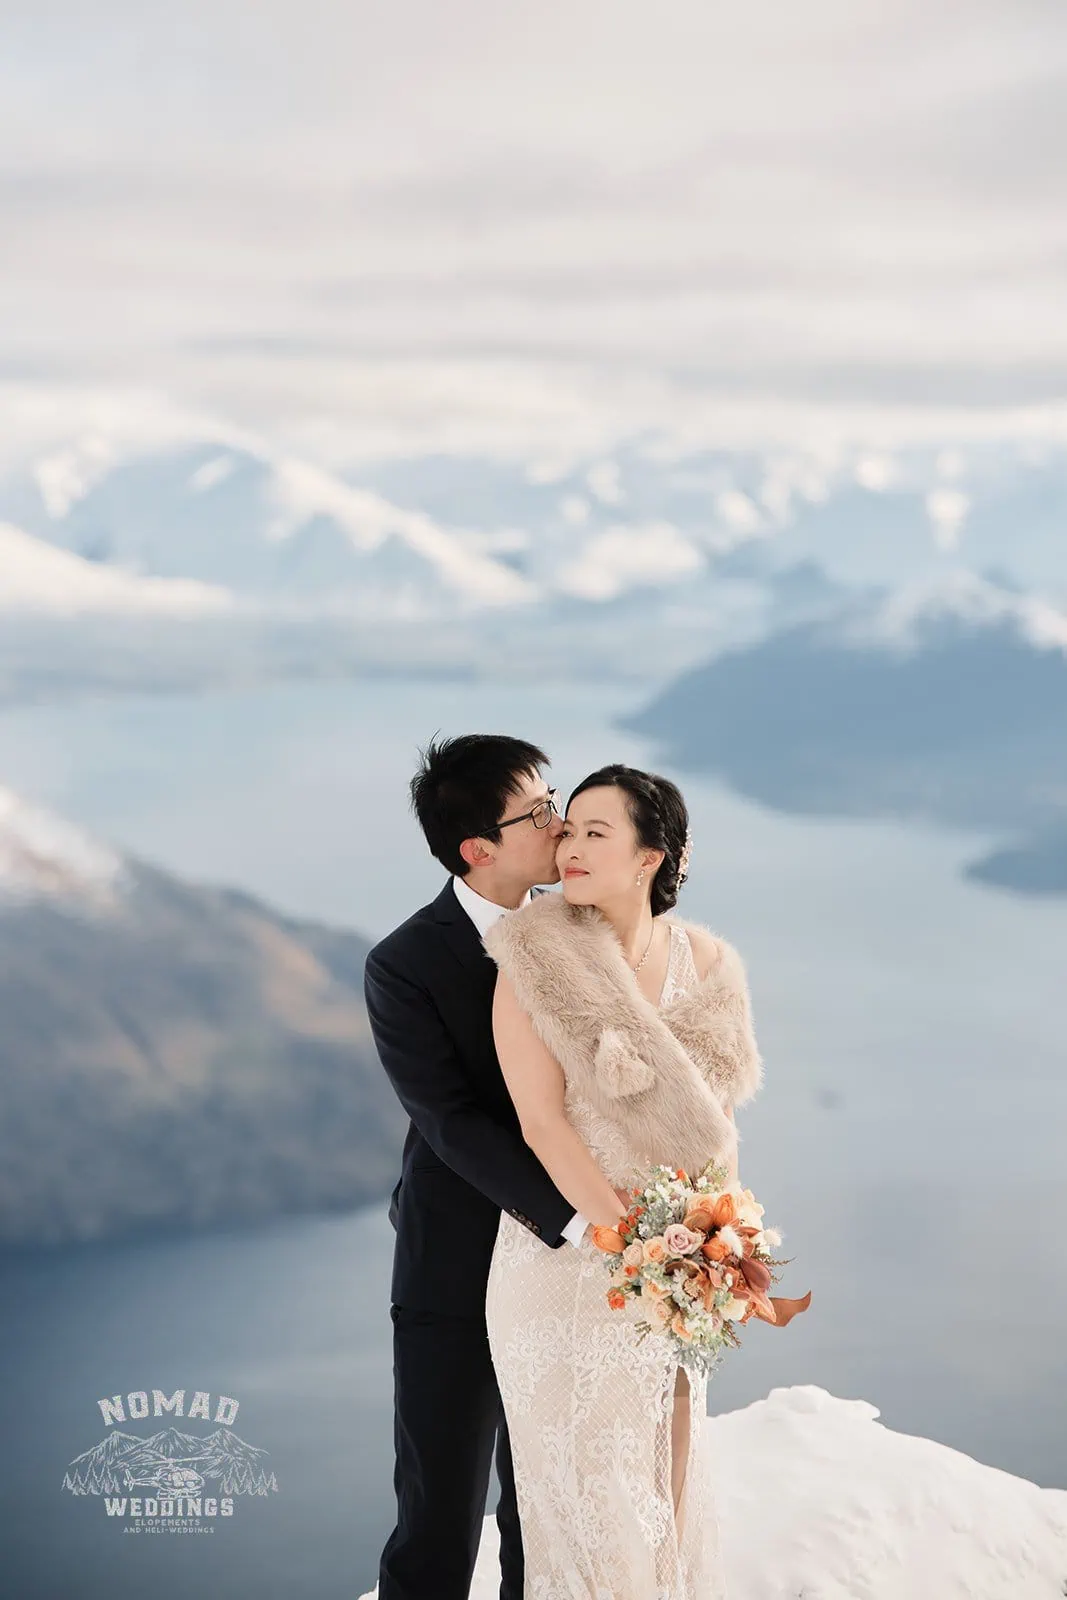 A bride and groom, Joanna and Tony, share a romantic kiss during their pre-wedding shoot in Queenstown, New Zealand's snowy mountains.